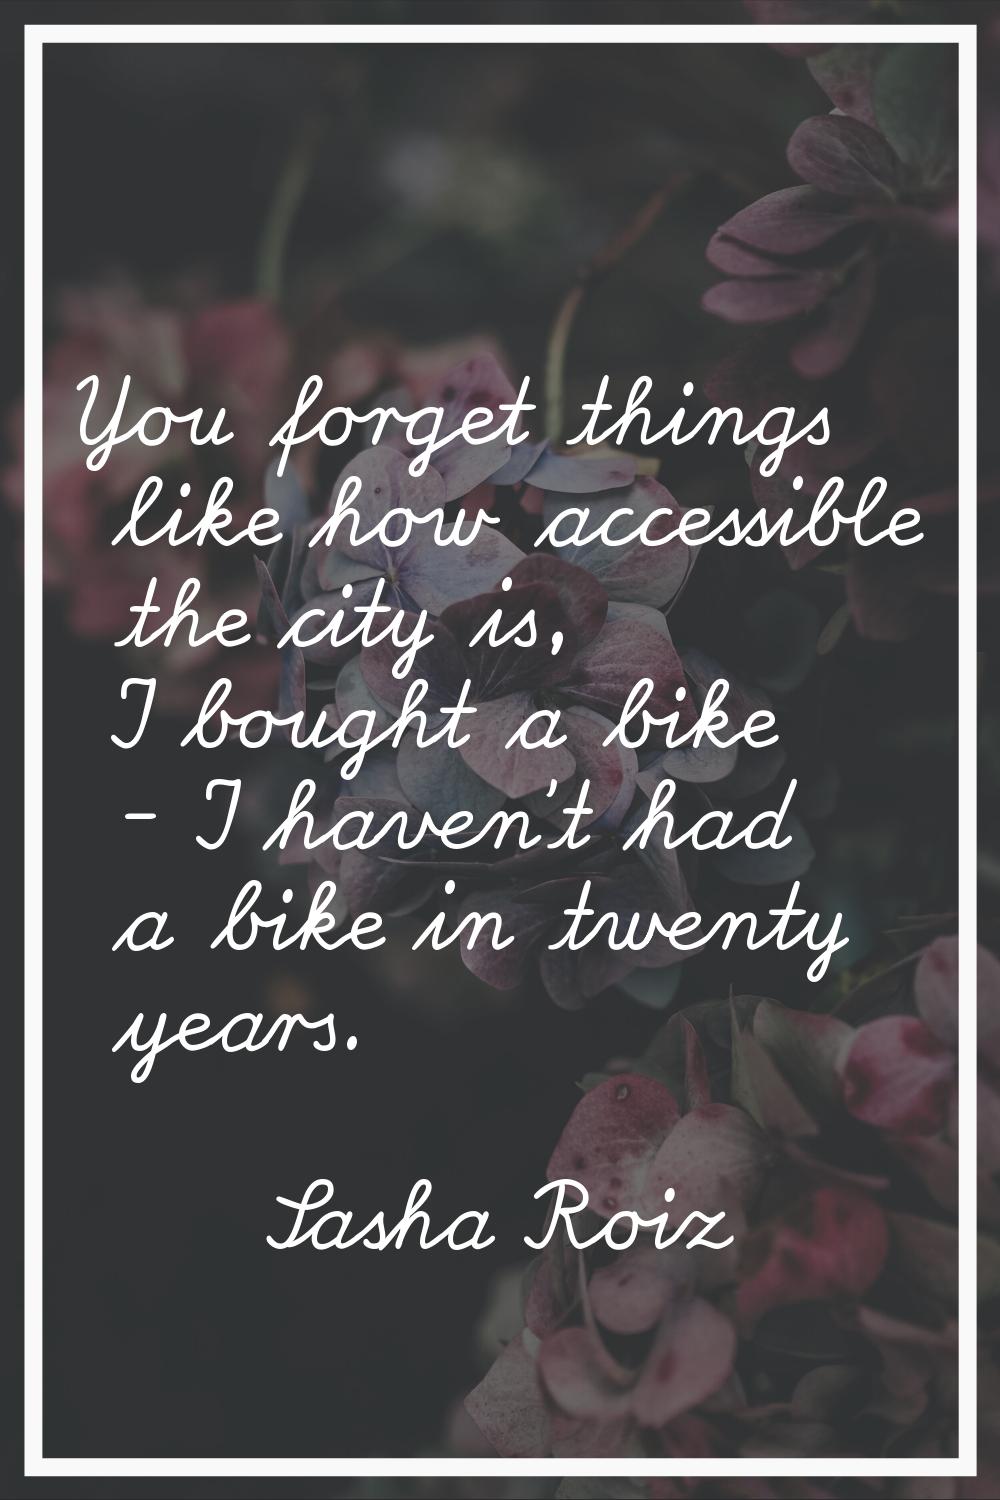 You forget things like how accessible the city is, I bought a bike - I haven't had a bike in twenty